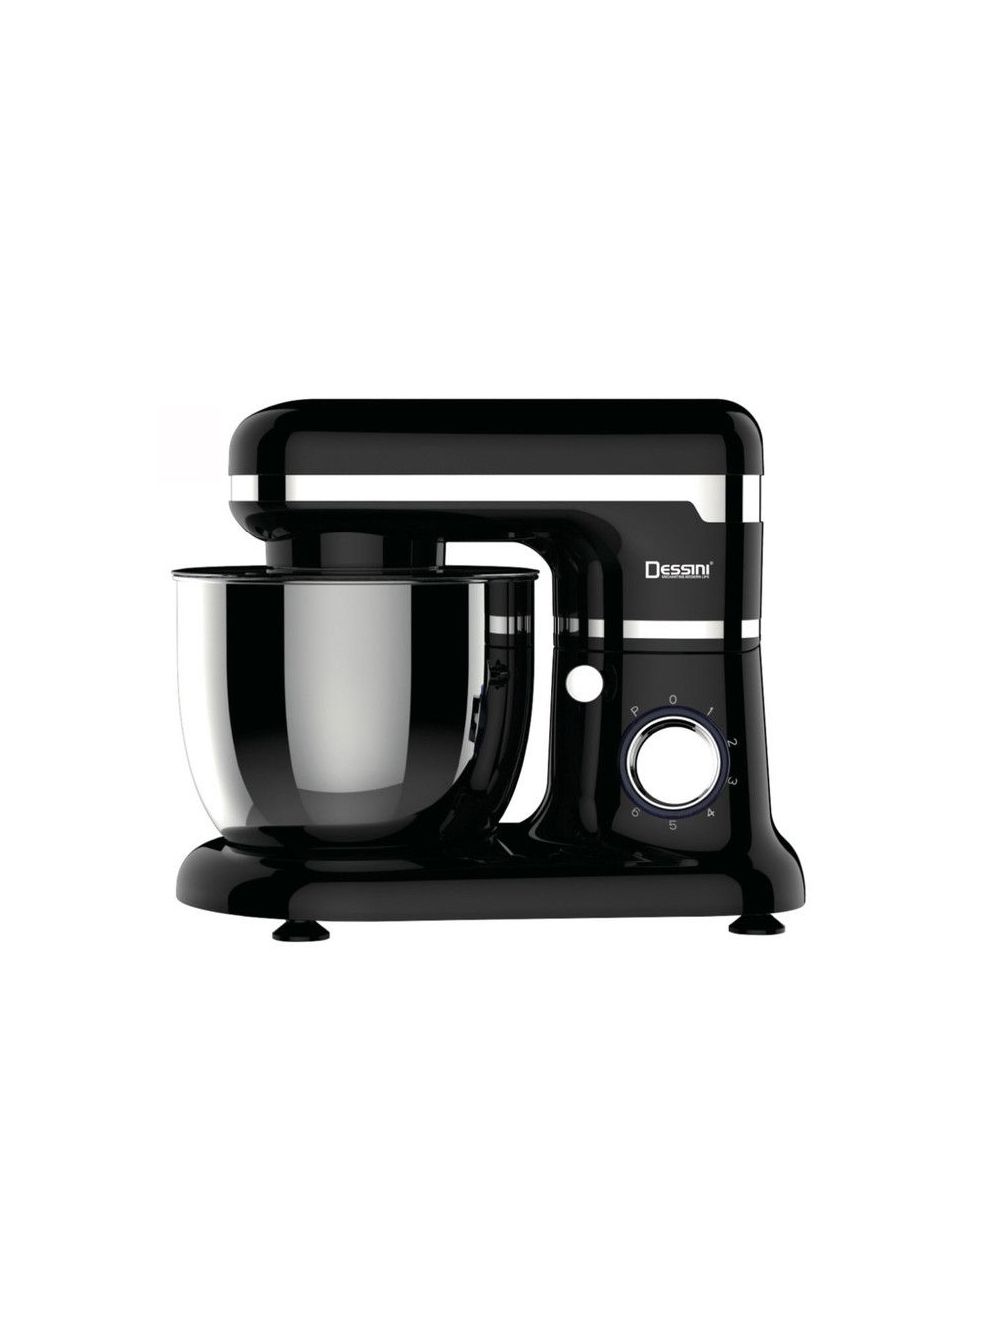 Dessini High Quality Multifunctions Stand Mixer WIth Bowl, 1000W-AKAT204